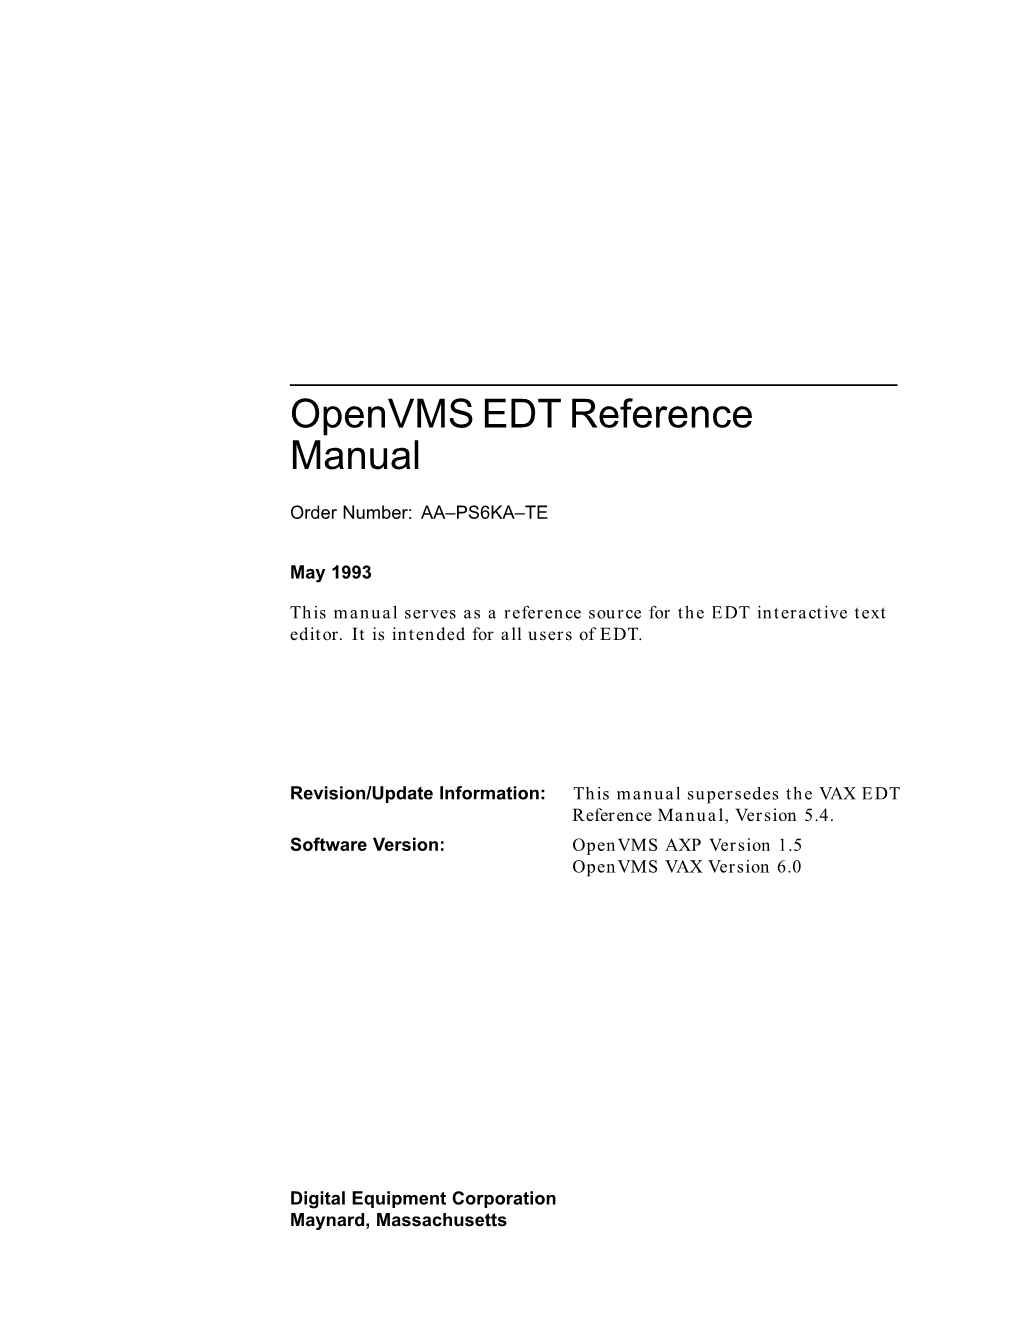 Openvms EDT Reference Manual